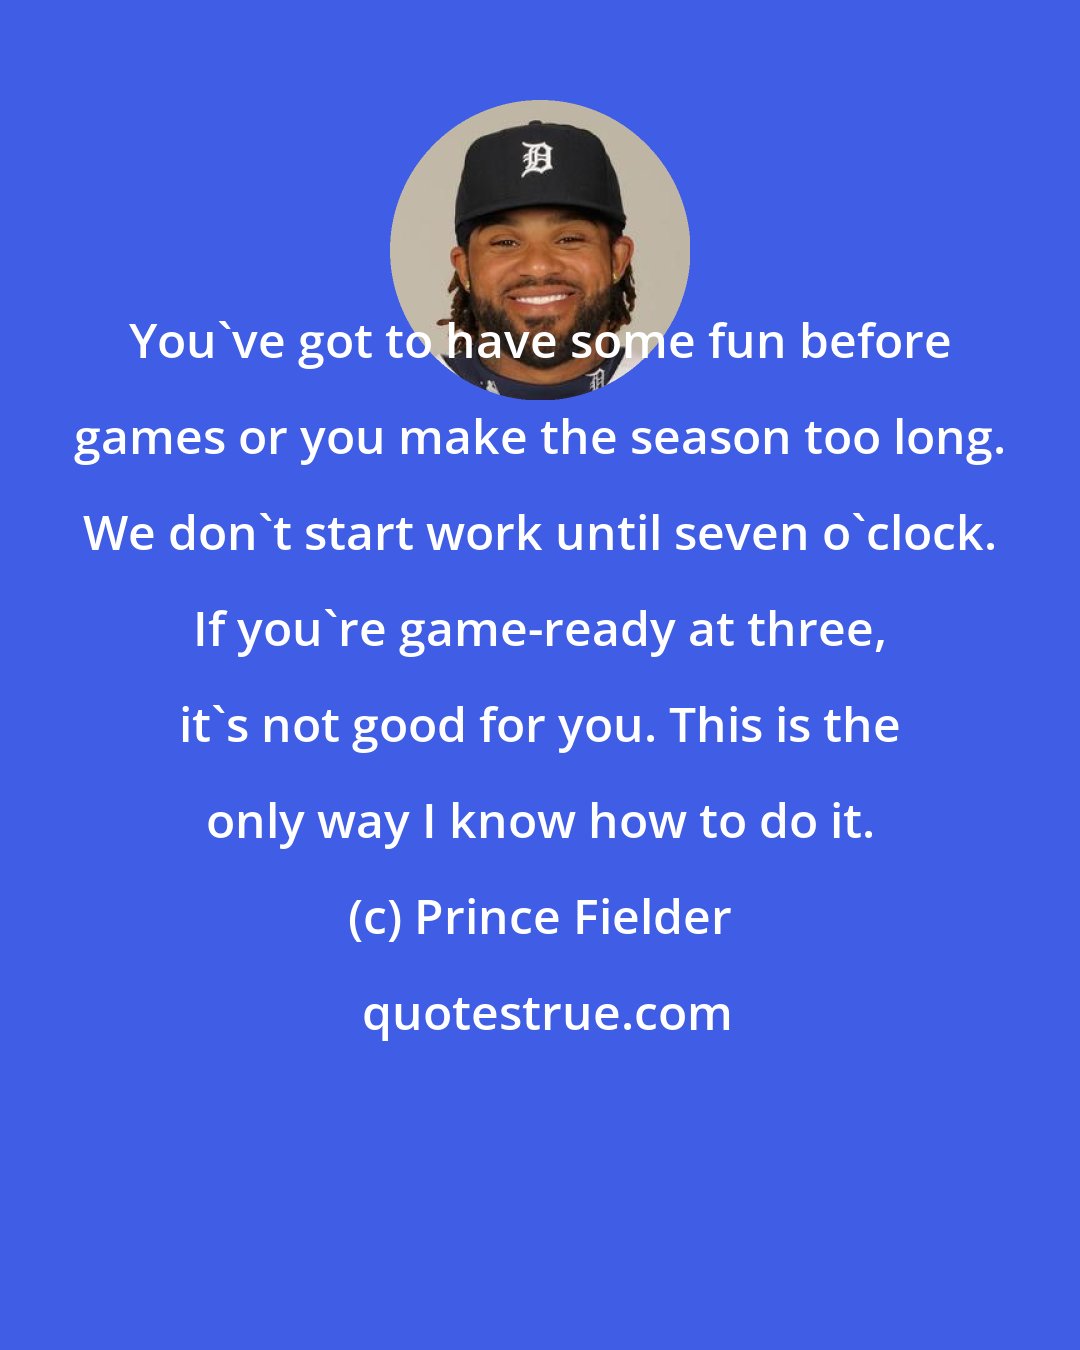 Prince Fielder: You've got to have some fun before games or you make the season too long. We don't start work until seven o'clock. If you're game-ready at three, it's not good for you. This is the only way I know how to do it.